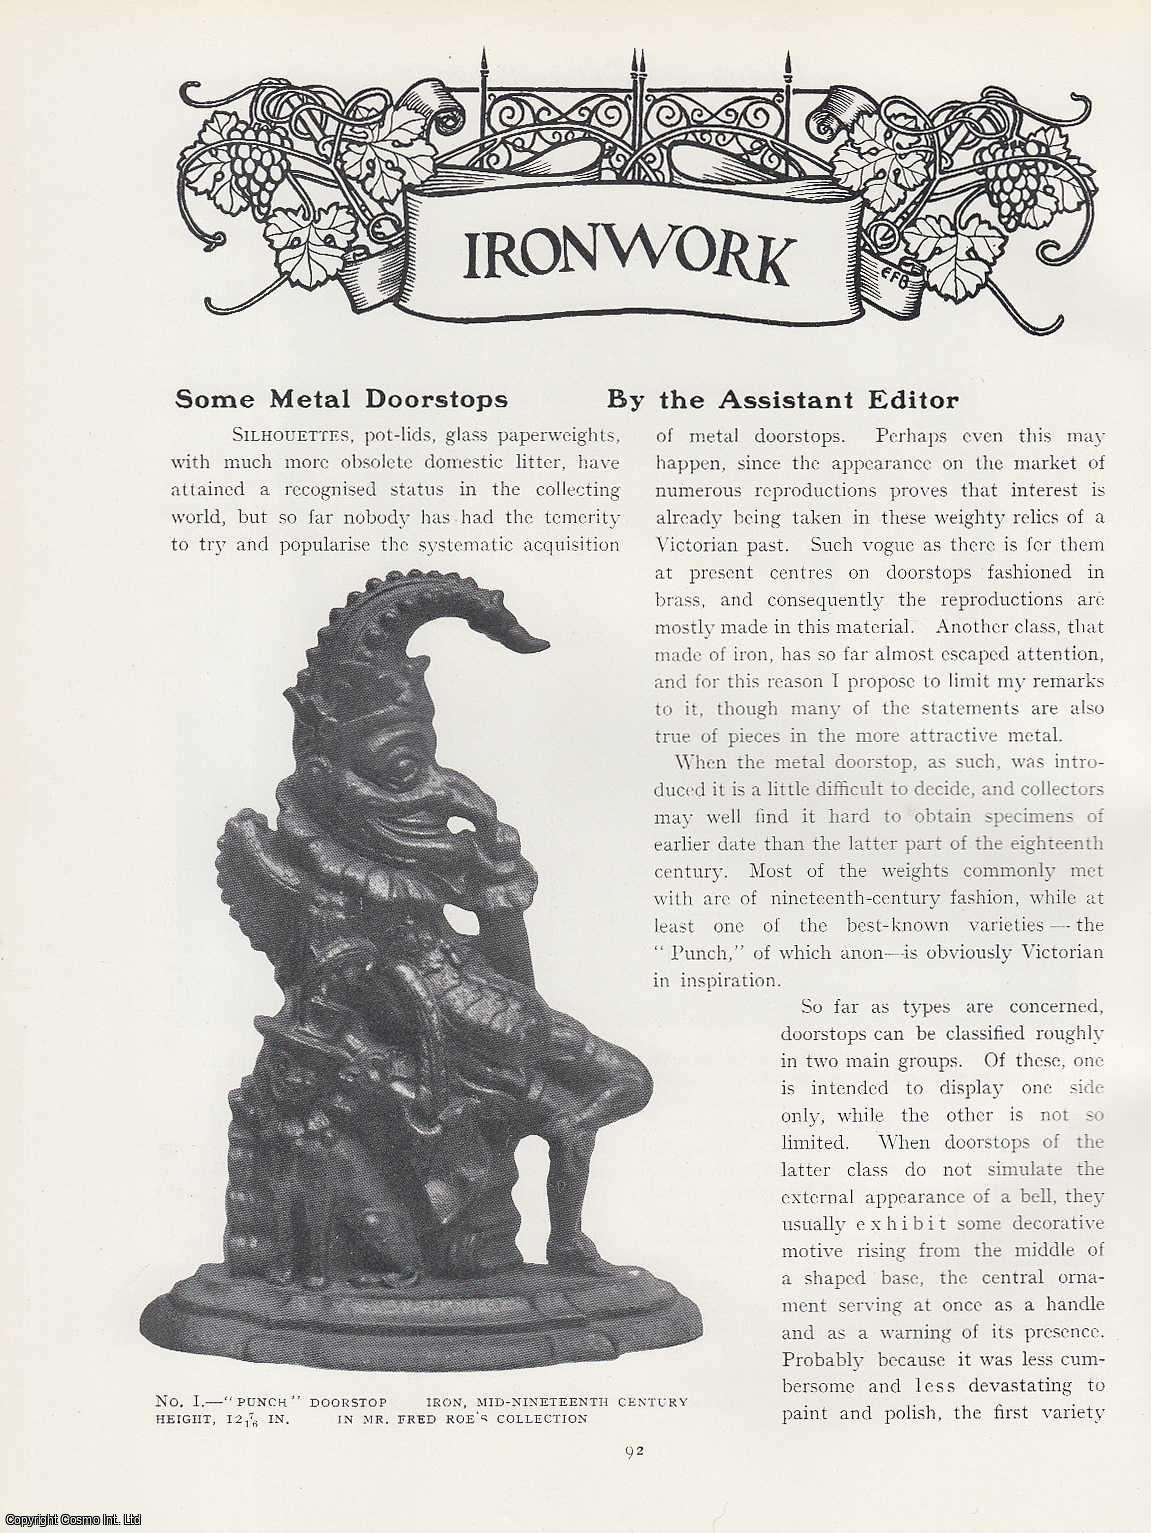 ---. - Some Metal Doorstops. An original article from The Connoisseur, 1925.